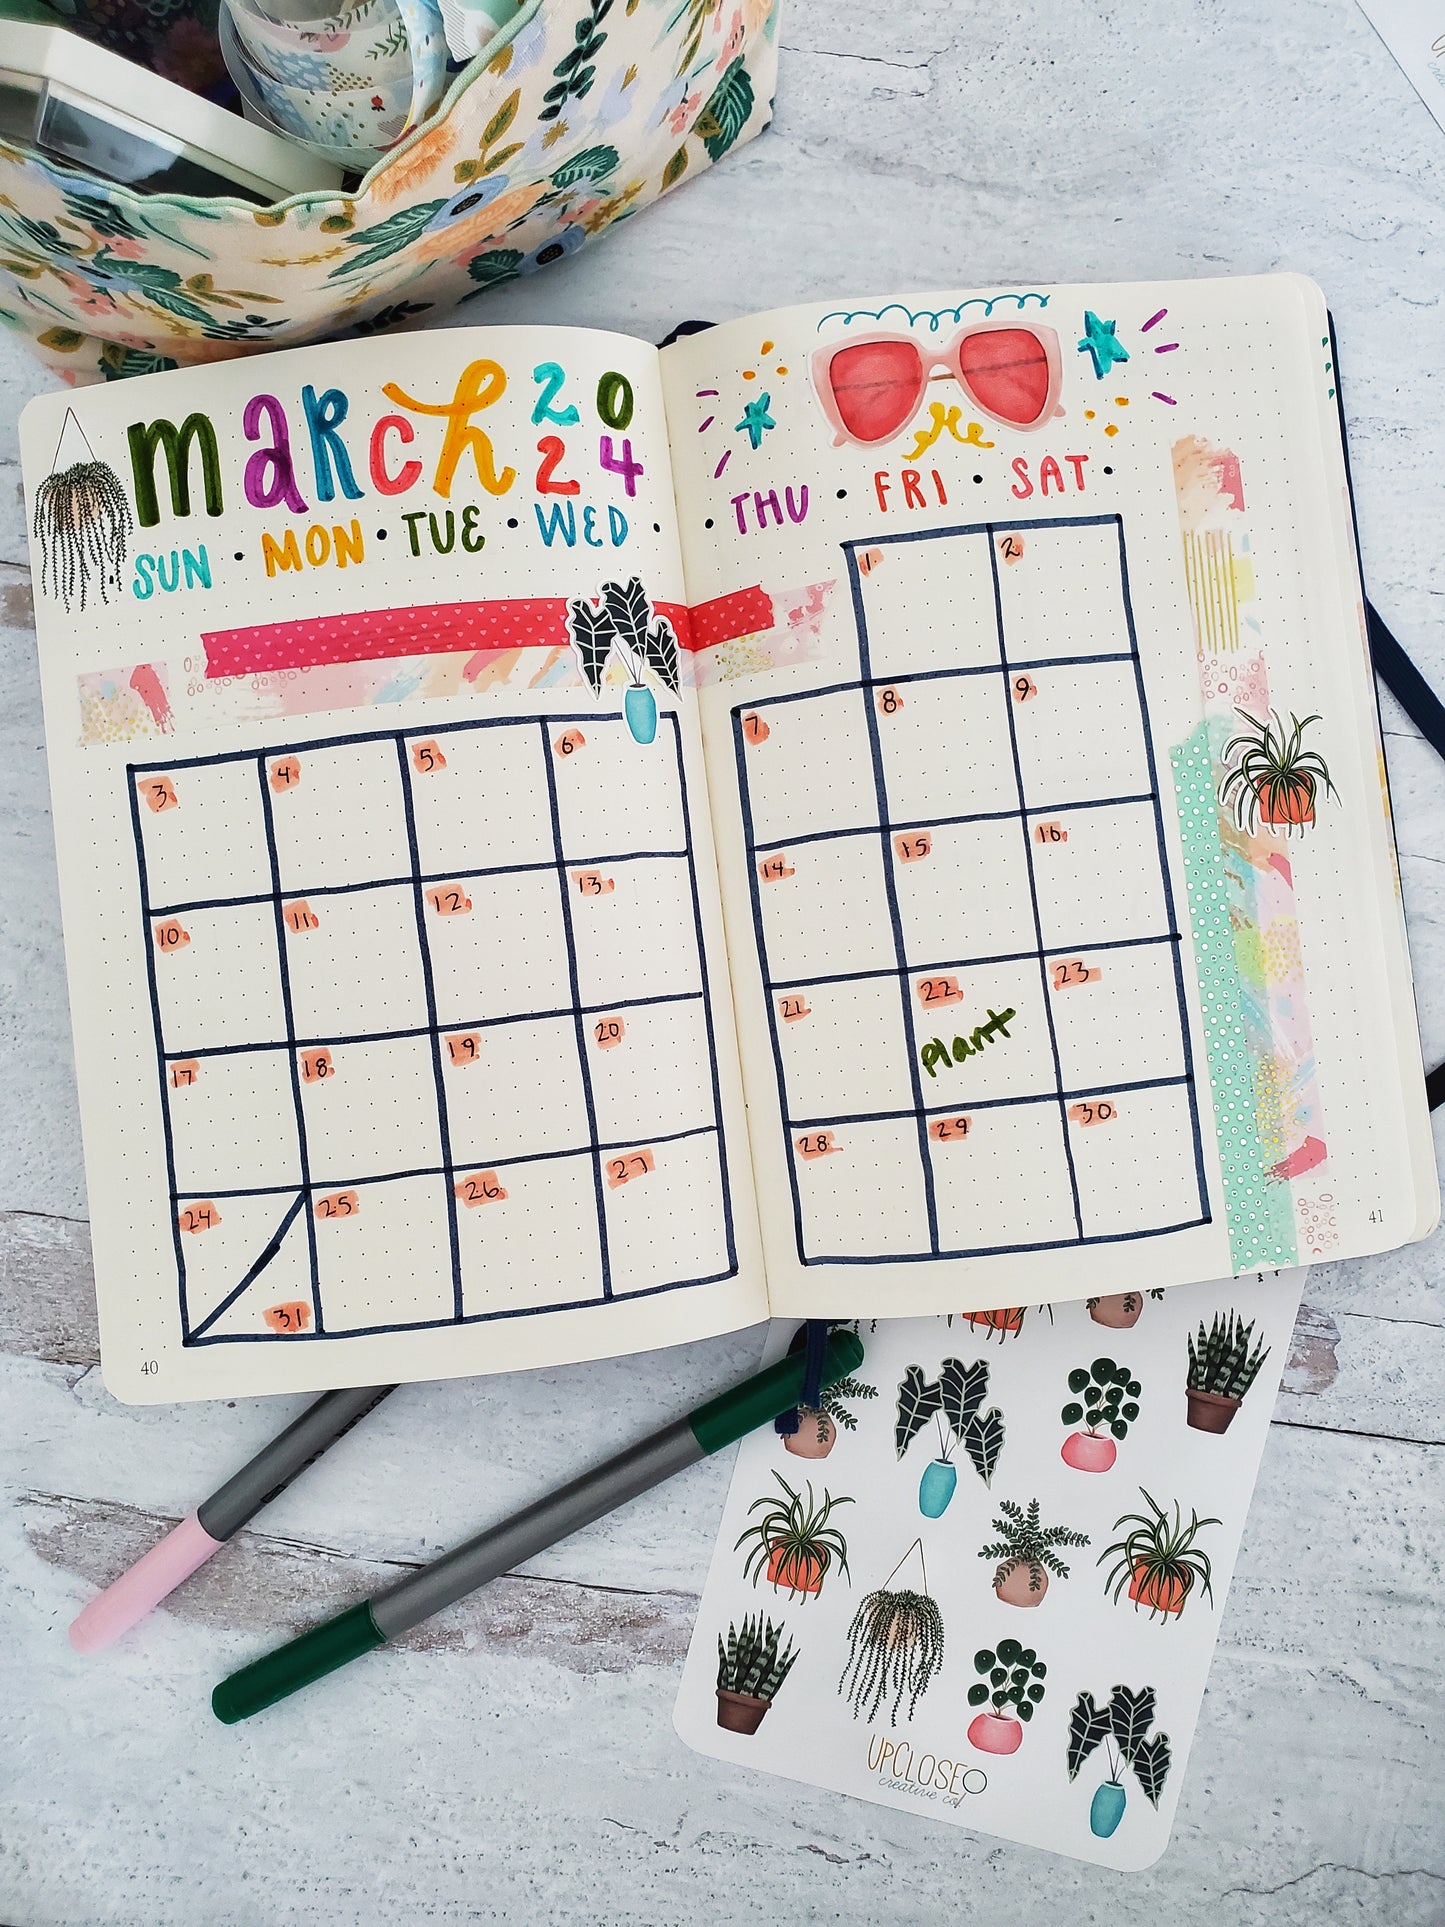 A very colorful bullet journal calendar spread decorated with the plant stickers.